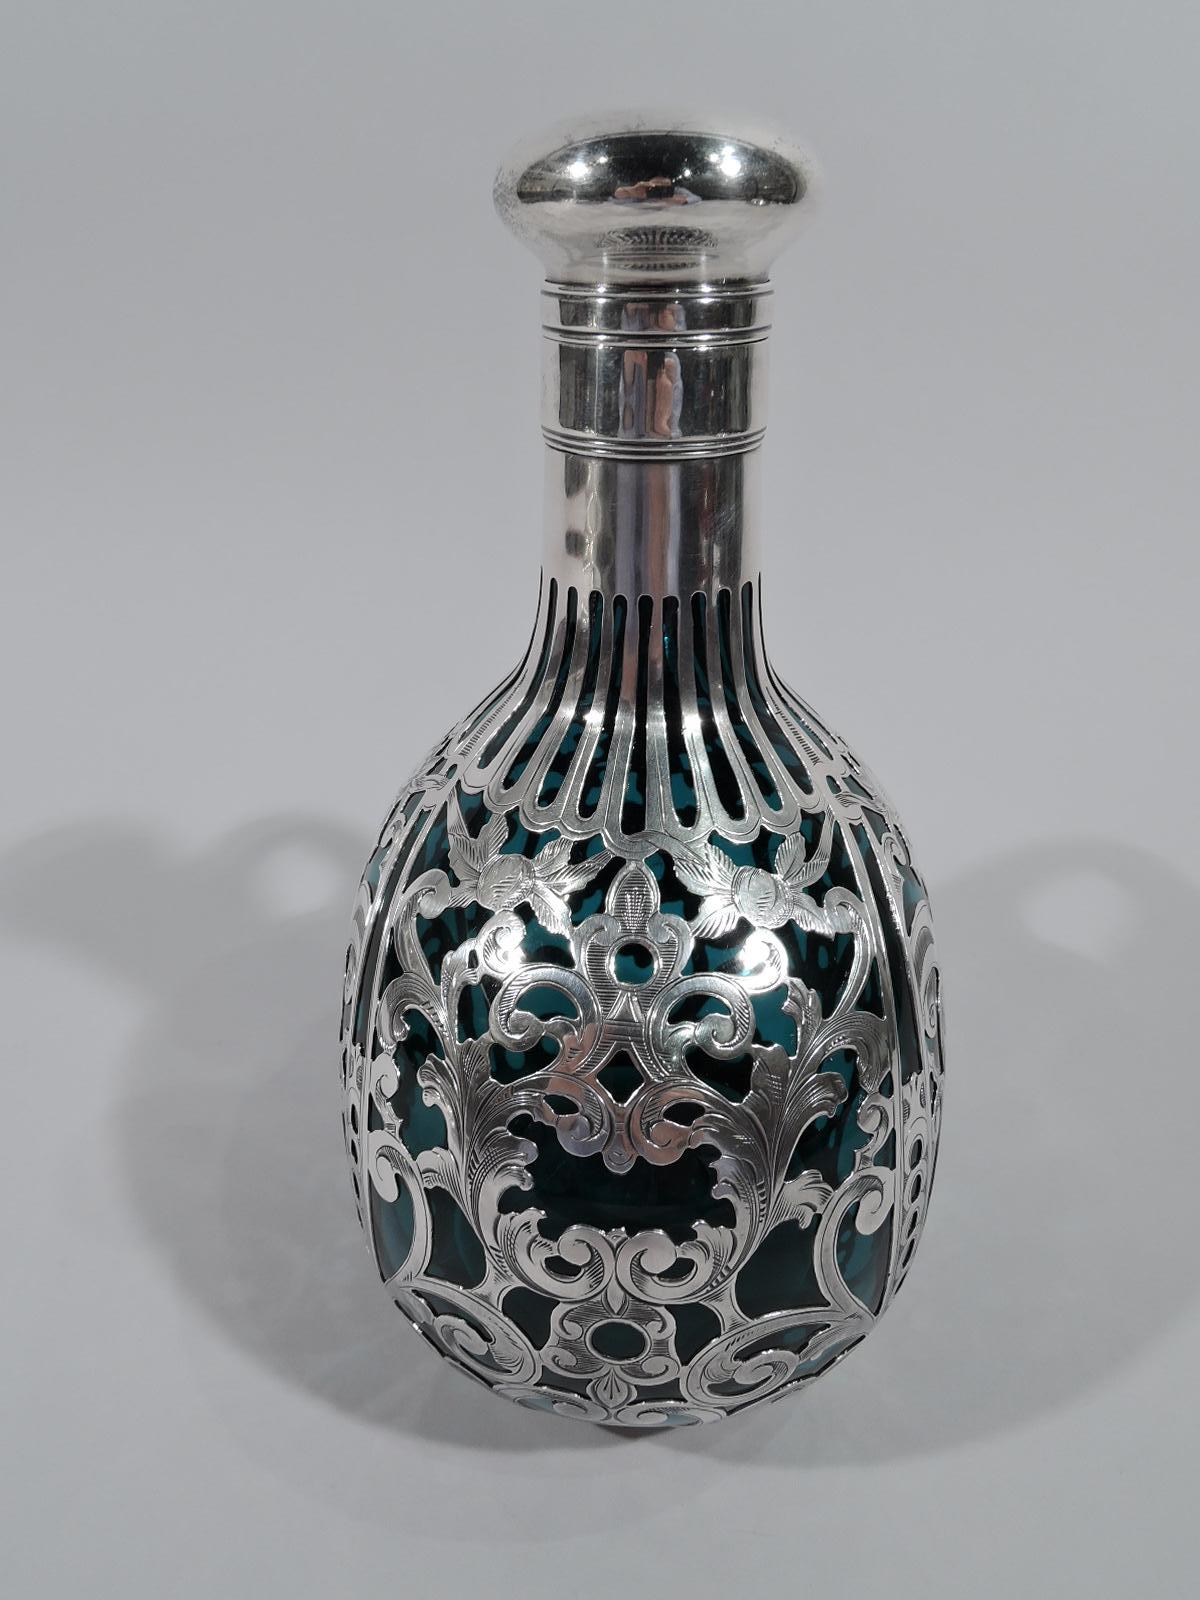 Art Nouveau glass decanter with silver overlay. Made by Gorham in Providence, ca 1890. Flattish round bowl with cylindrical neck and hinged and cork-lined cover. Glass is blue-tinged sea green (or teal) with dense overlay in form of leafy scrolls